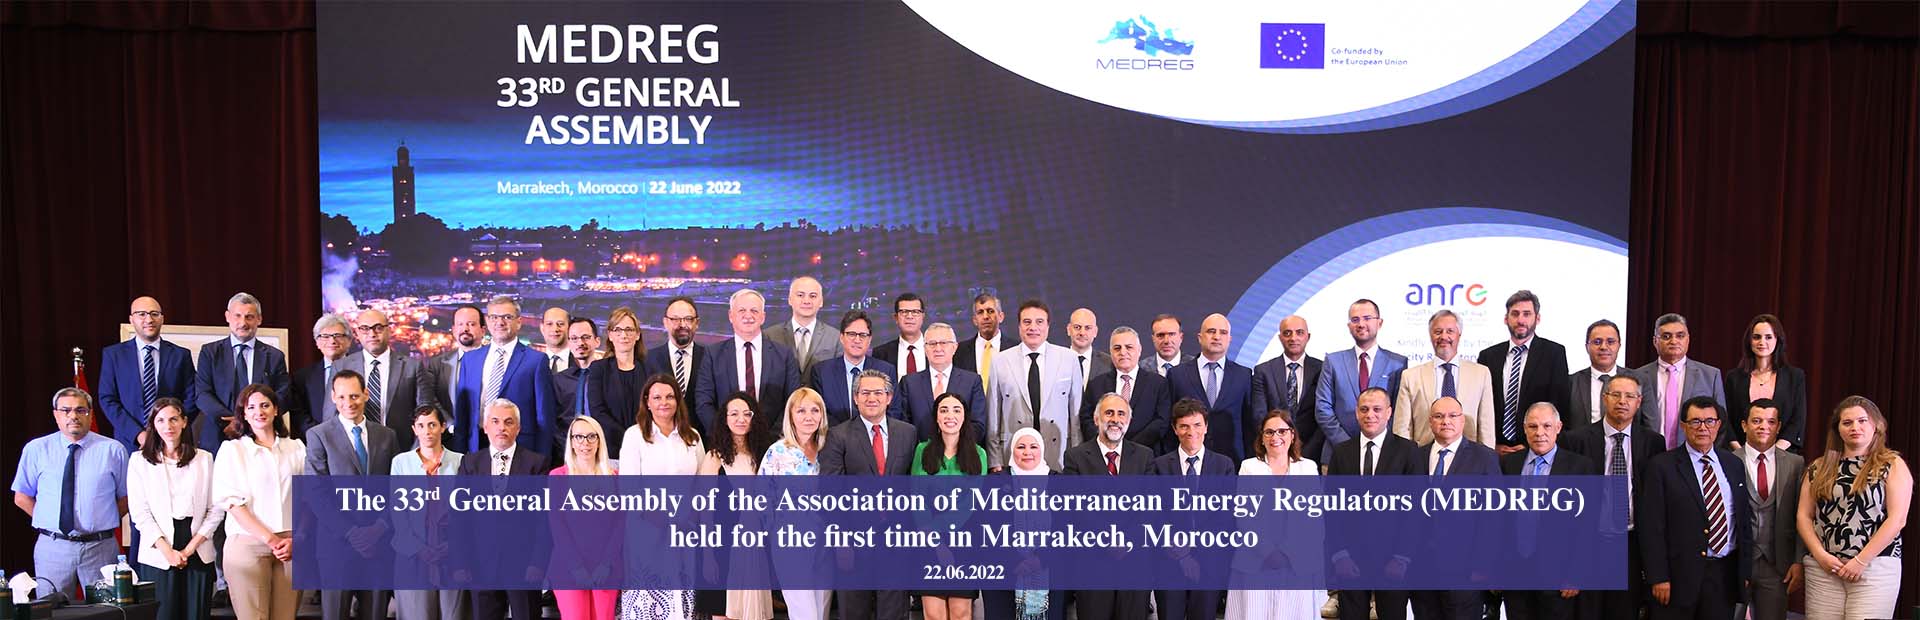 The 33rd General Assembly of the Association of Mediterranean Energy Regulators (MEDREG) held for the first time in Marrakech, Morocco.